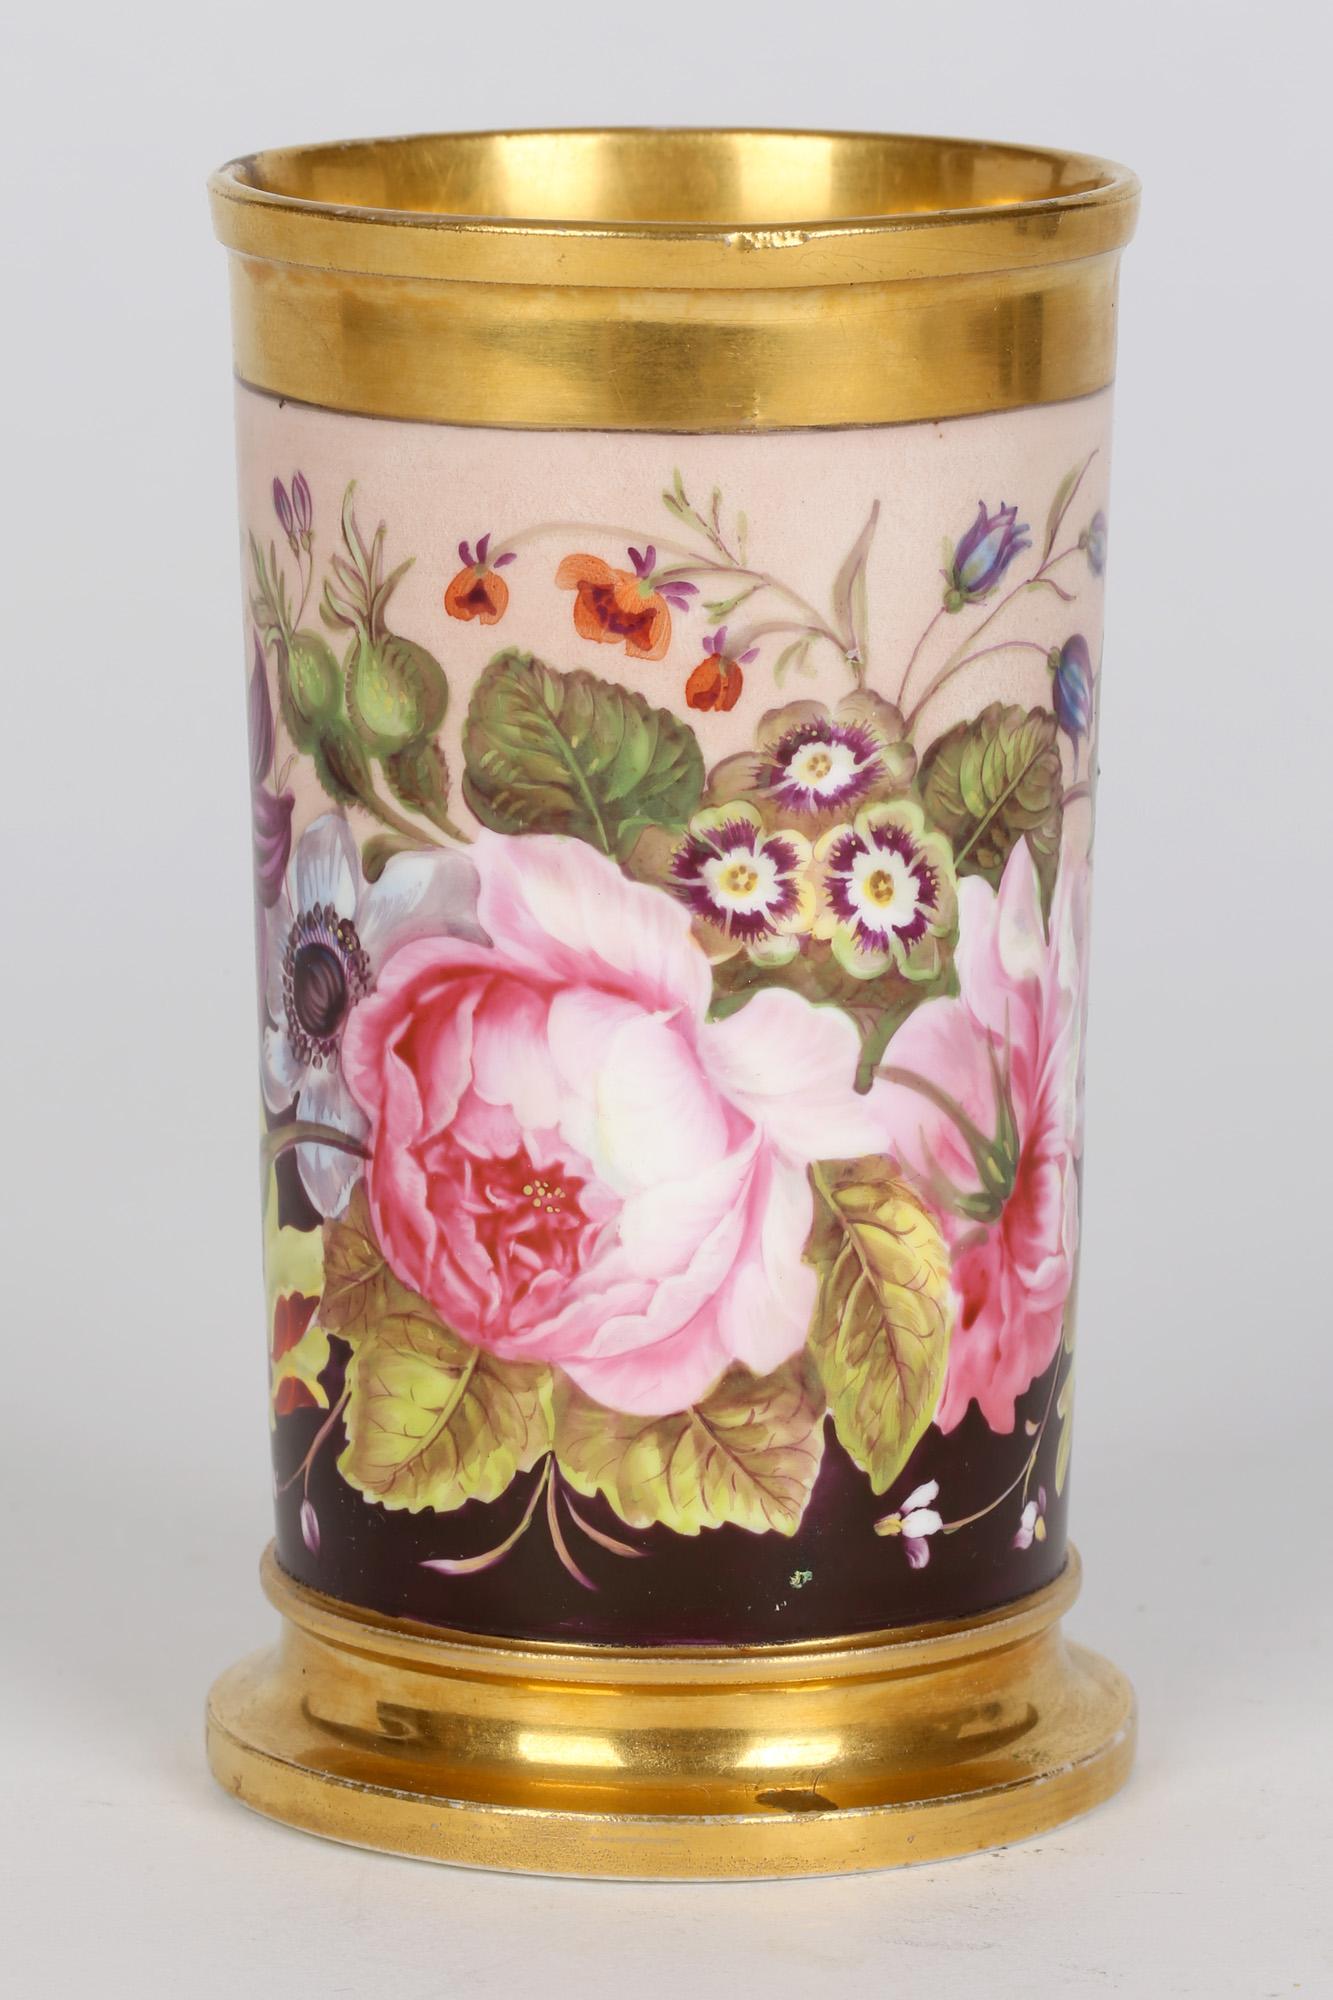 A stunning and exquisitely hand painted antique Rockingham porcelain vase decorated with floral blooms dating from around 1830. The finely made vase is of cylindrical shape with a wider stepped base and is hand painted with a continuous band of